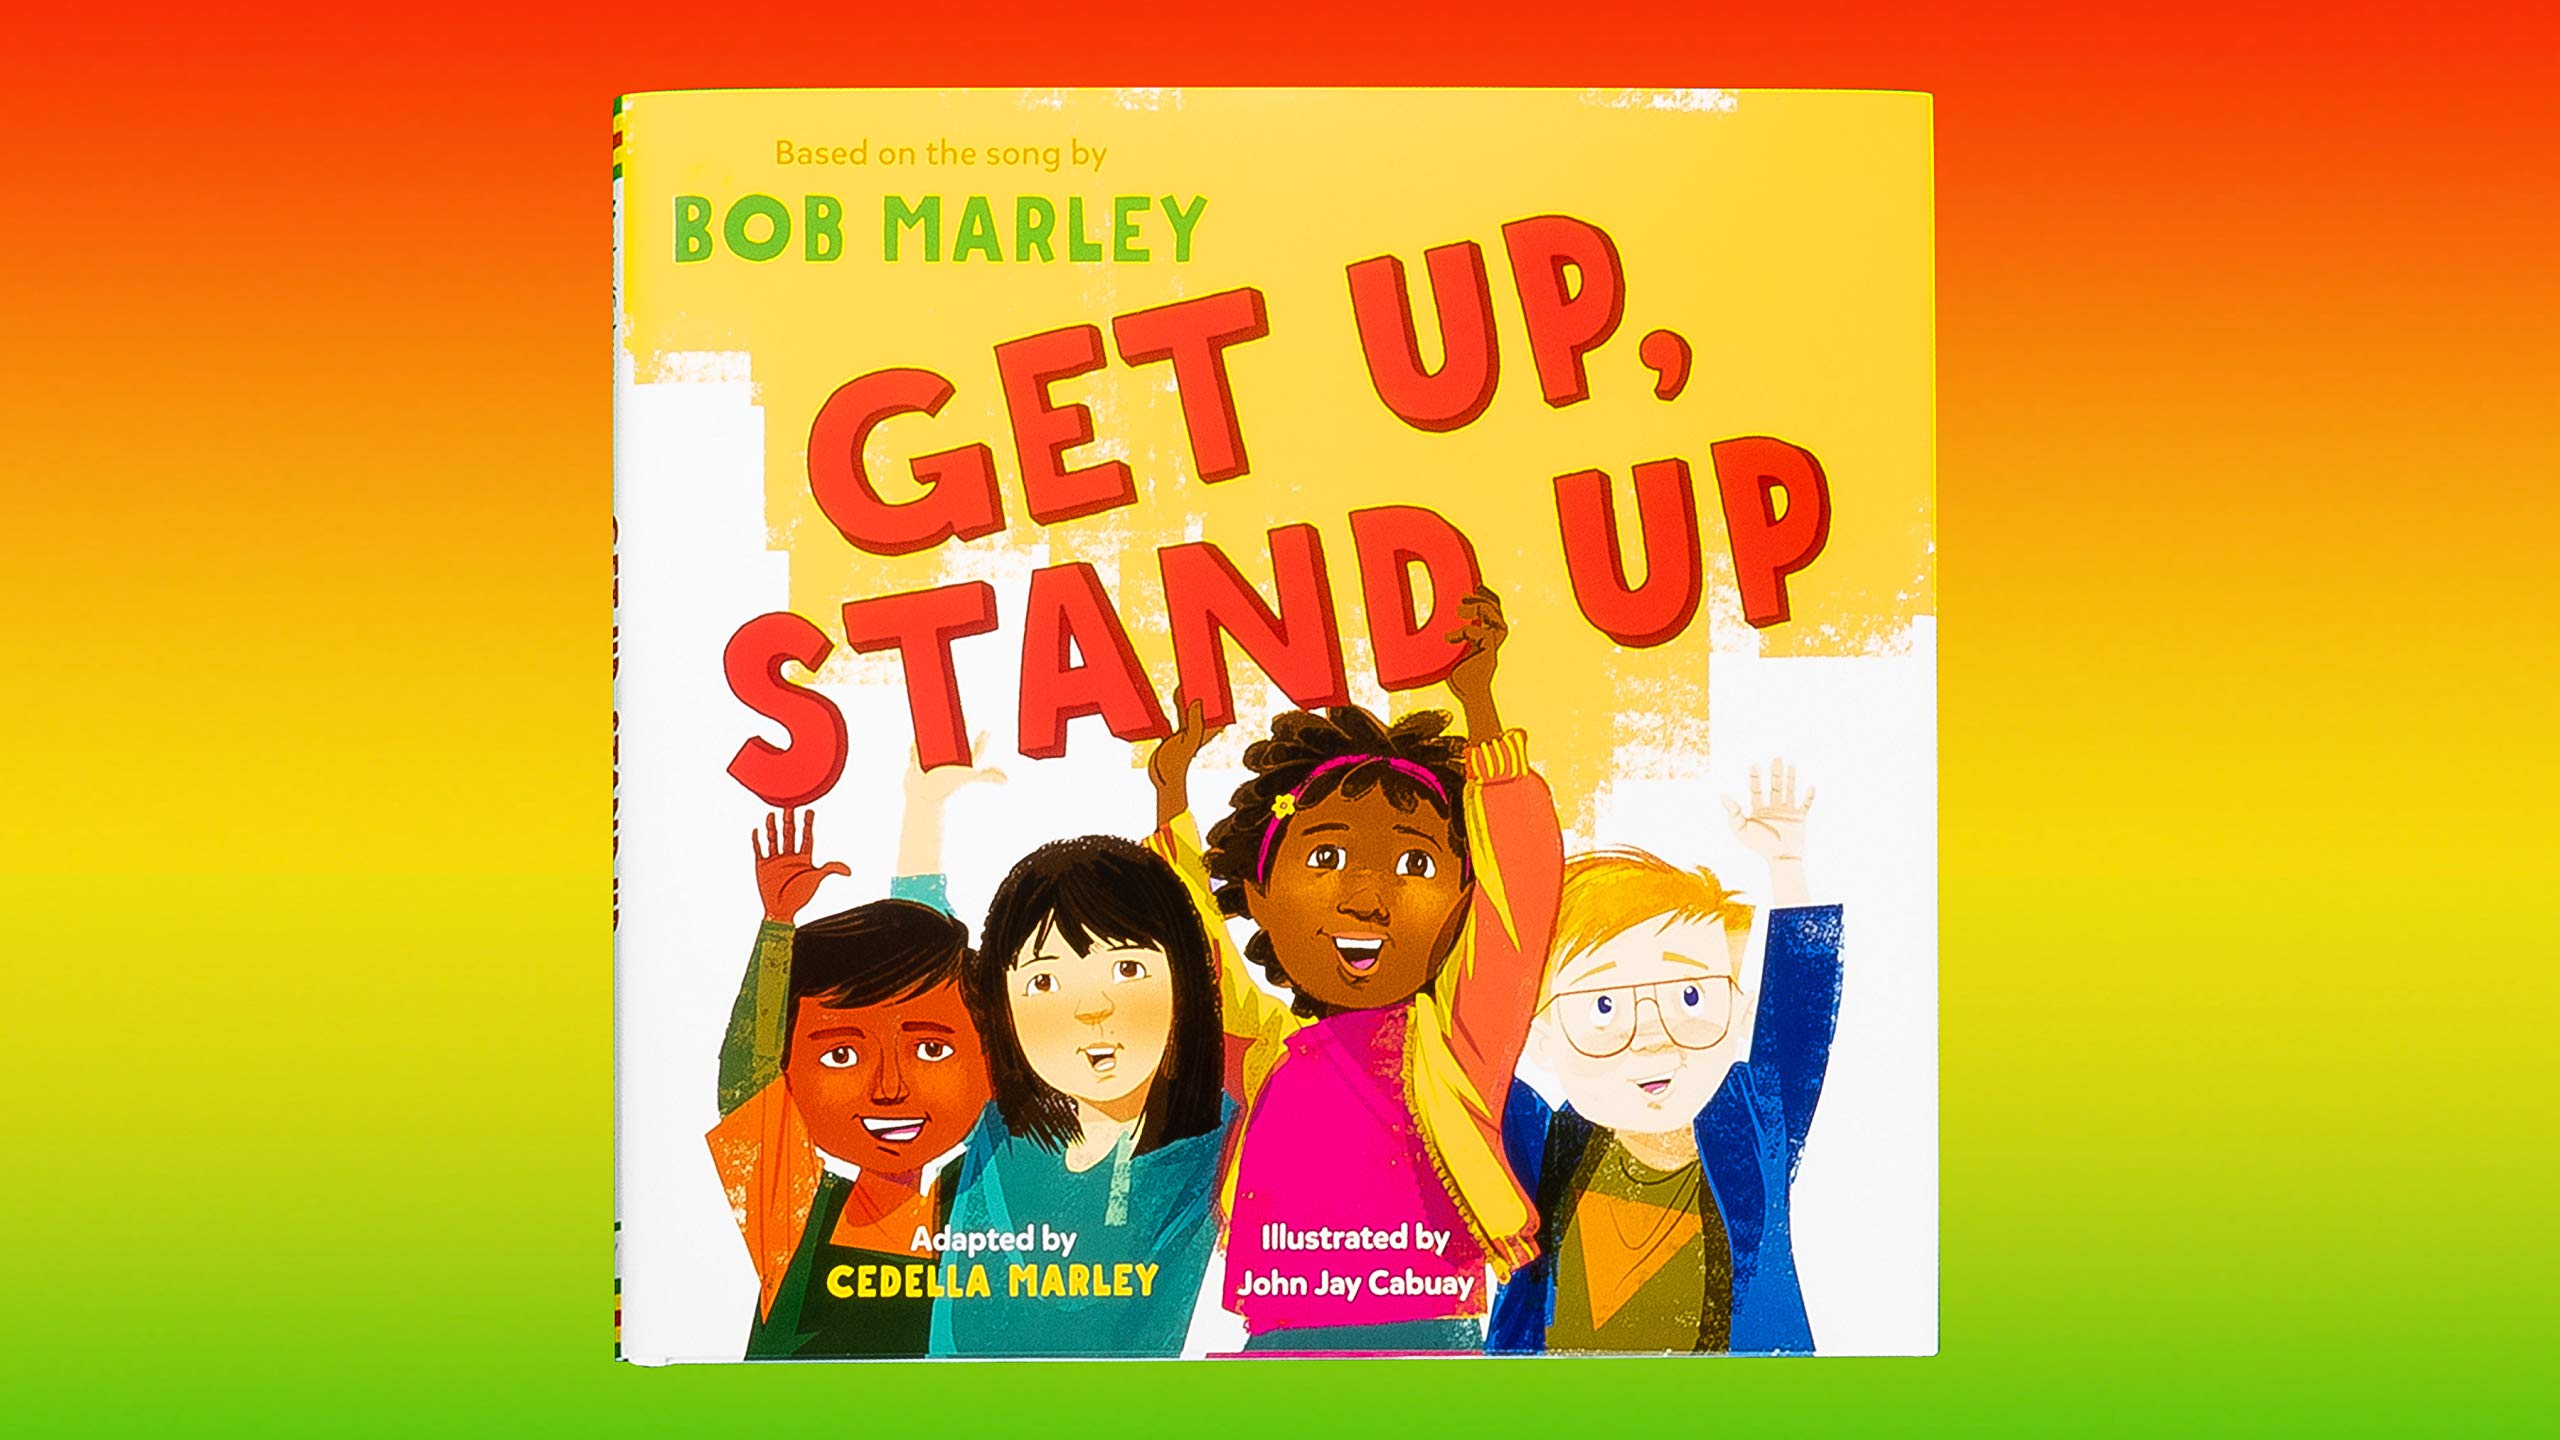 Get Up, Stand Up: (Preschool Music Book, Multicultural Books for Kids, Diversity Books for Toddlers, Bob Marley Children's Books) (Bob Marley by Chronicle Books)